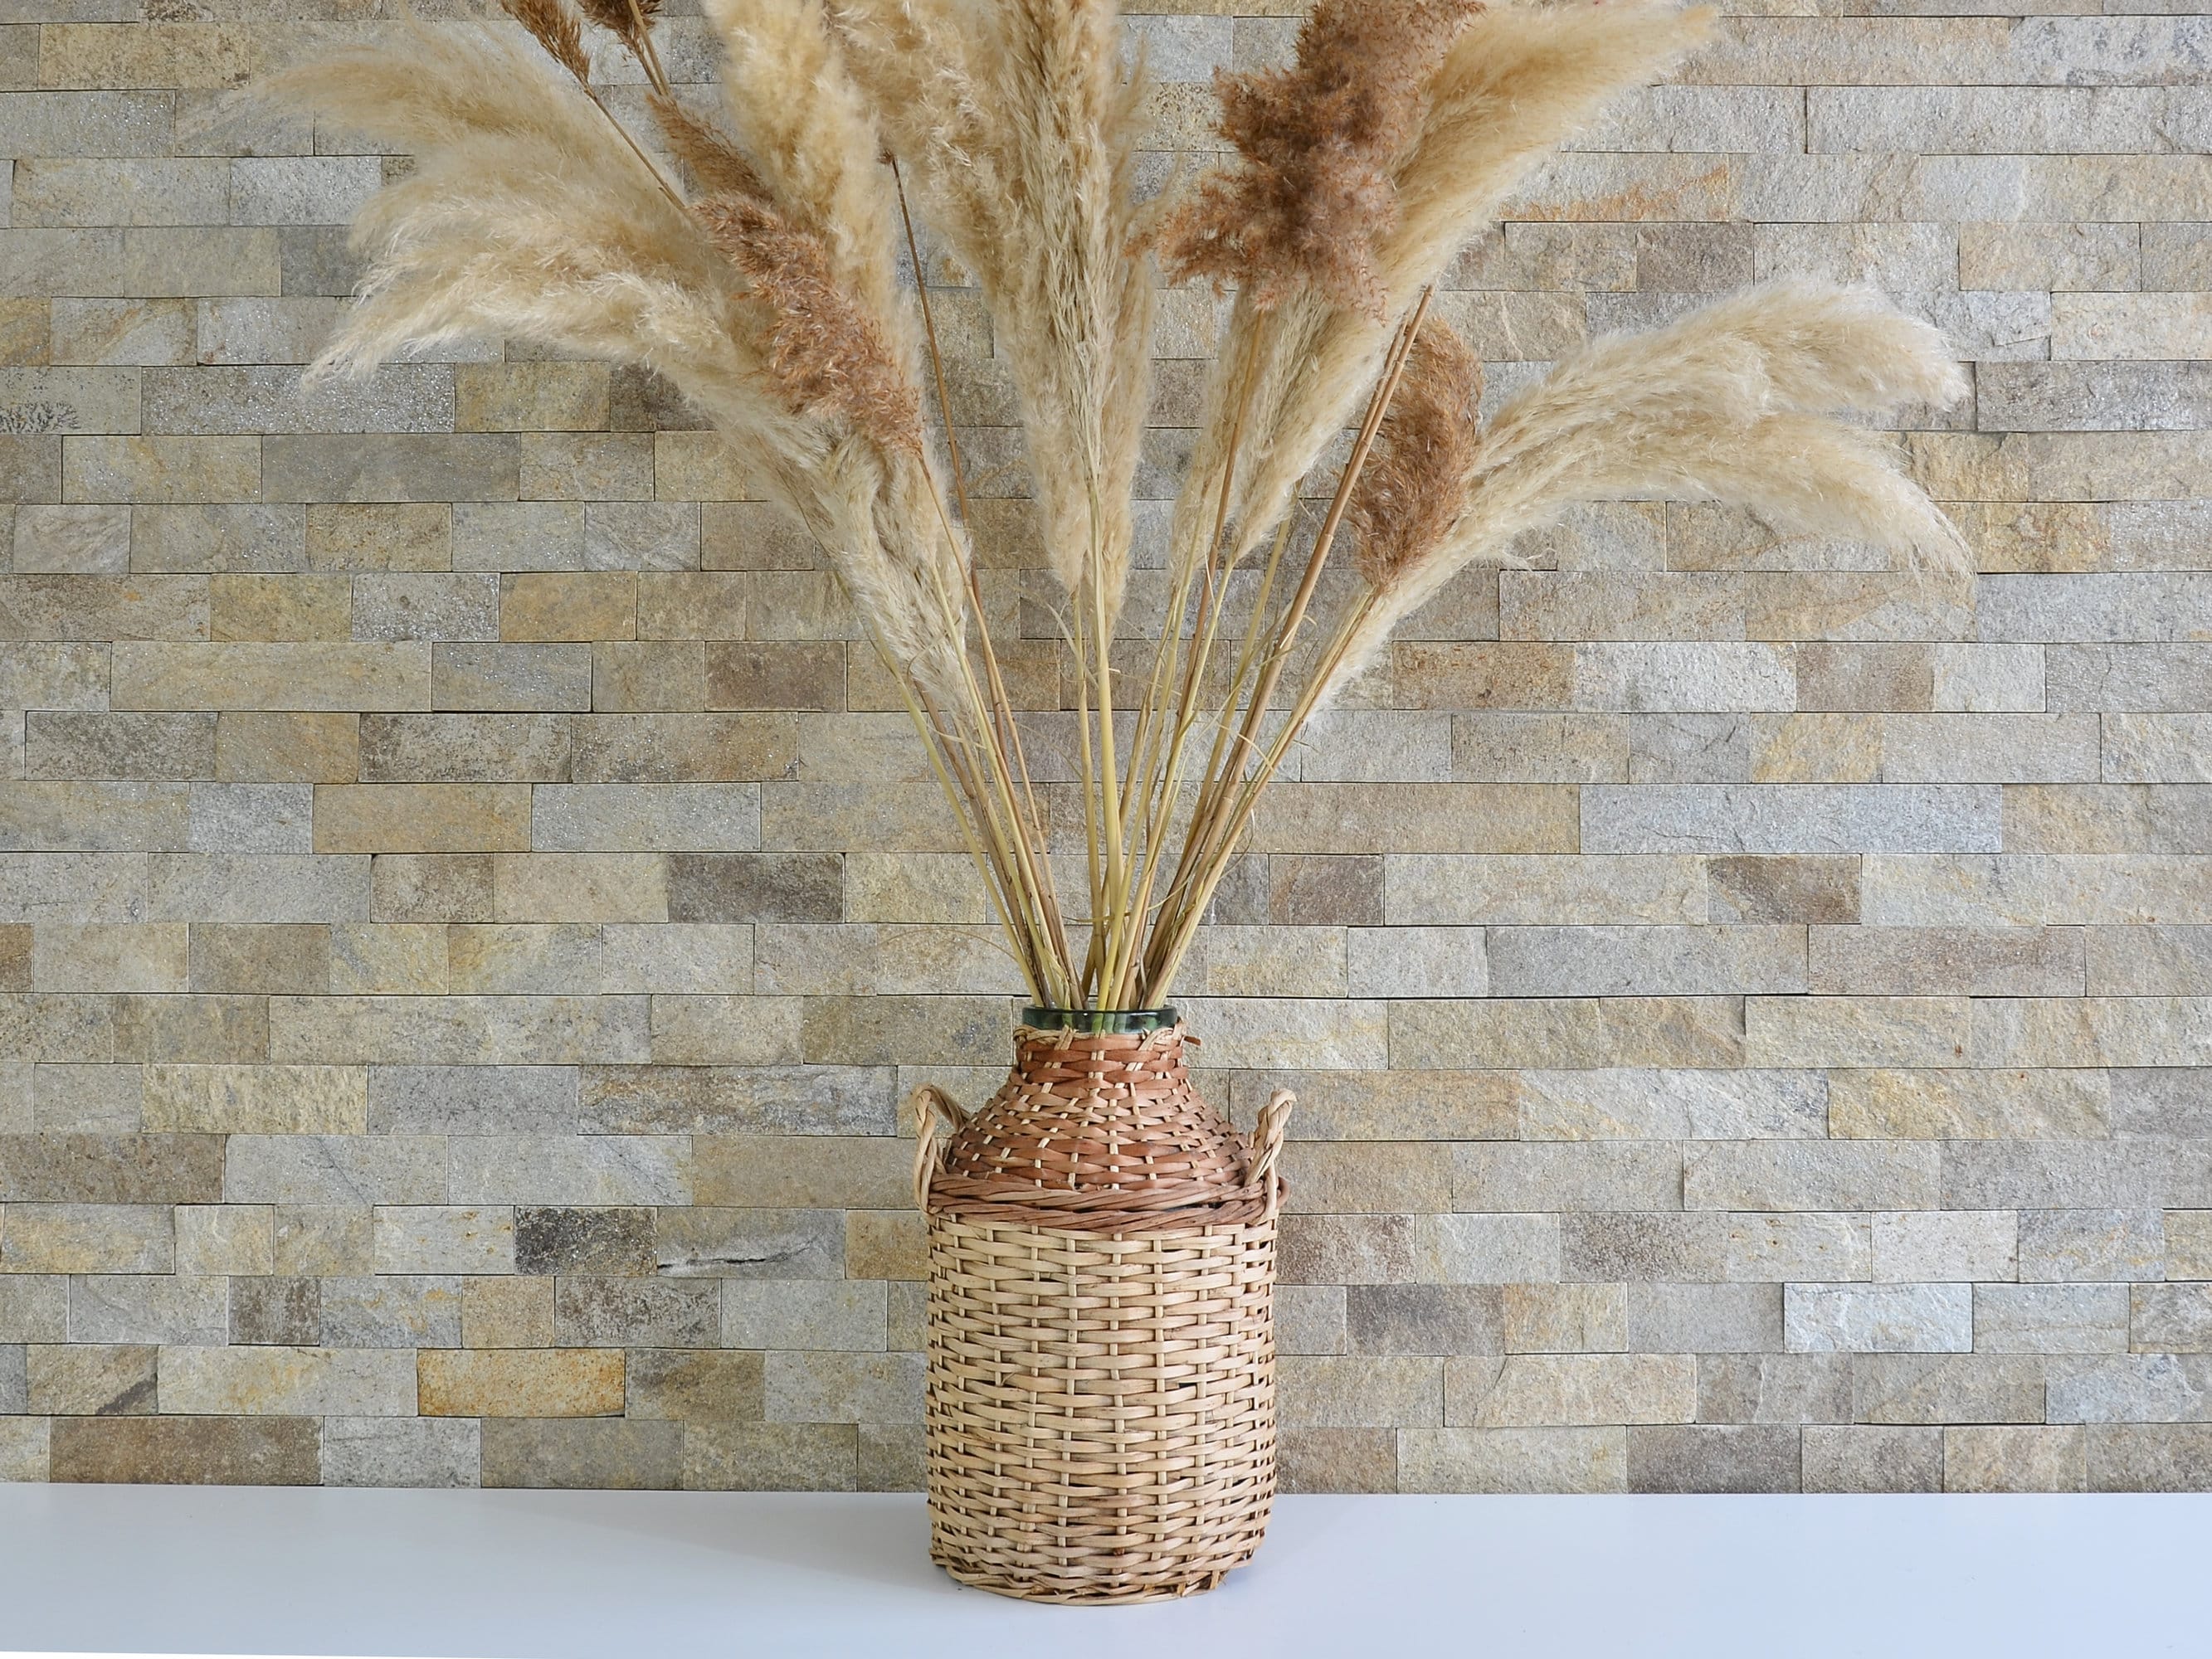 Large Size Flower Glass Vase with Hand Woven Straw Cover – Our Dining Table